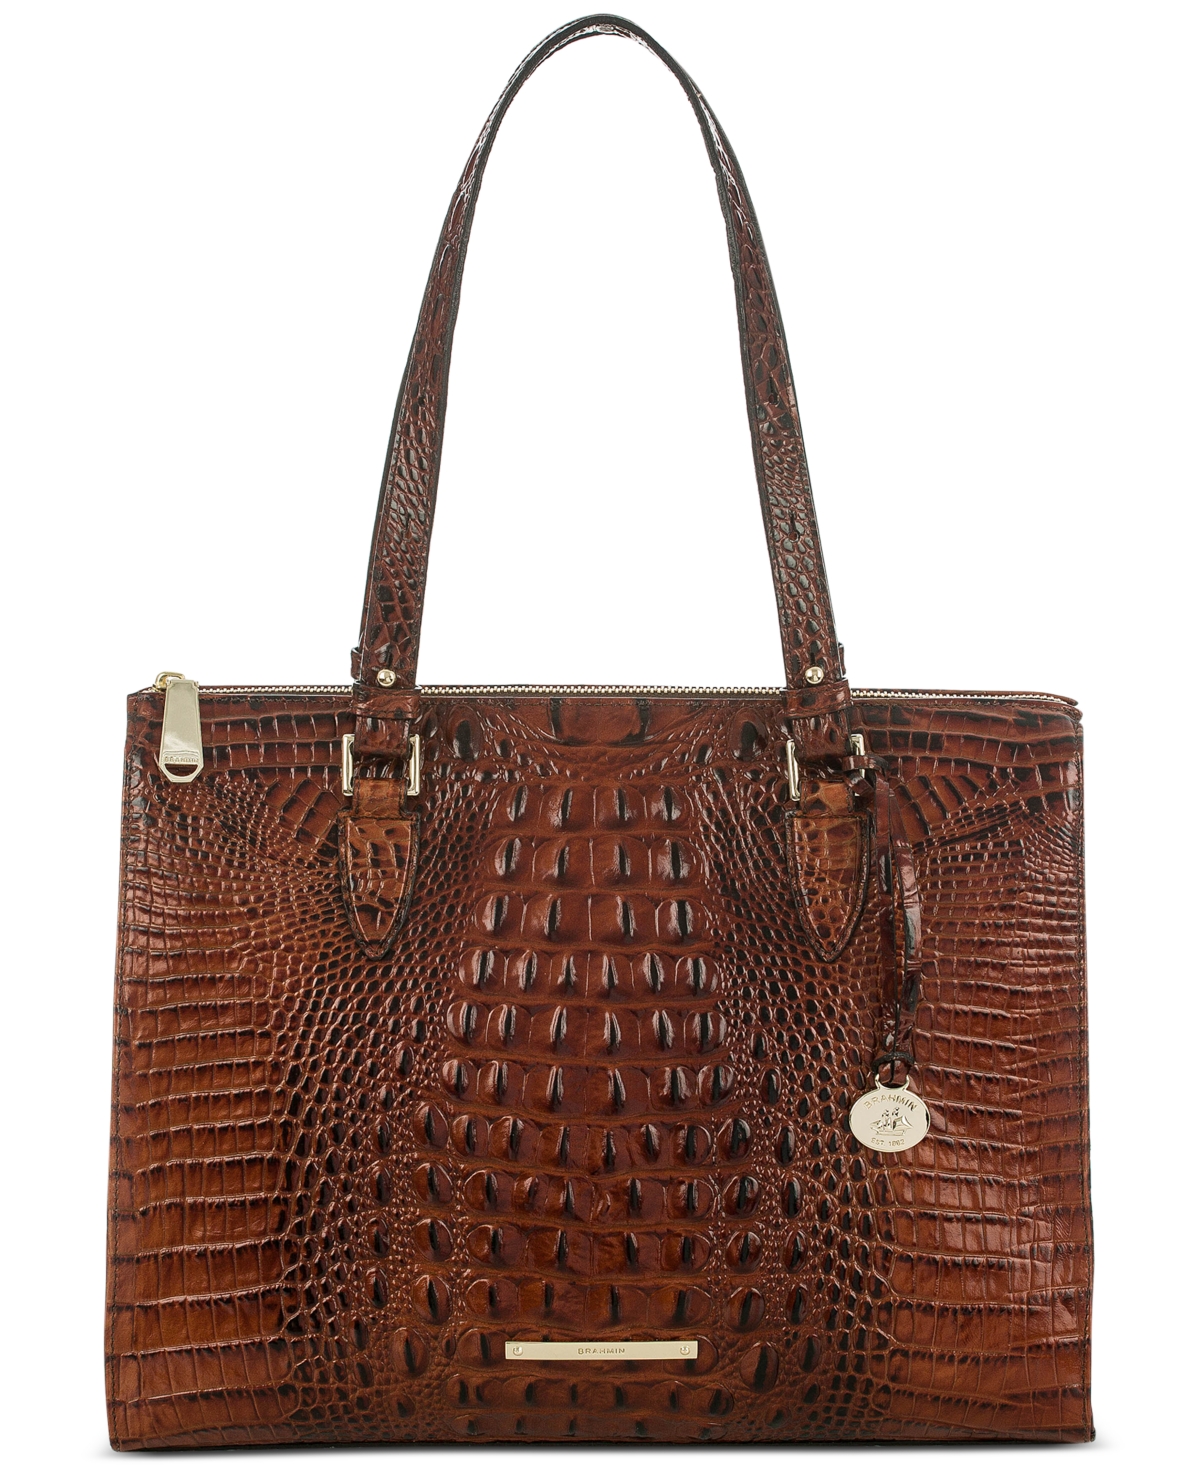 Anywhere Melbourne Embossed Leather Tote - Carnation/Gold, Created for Macy's